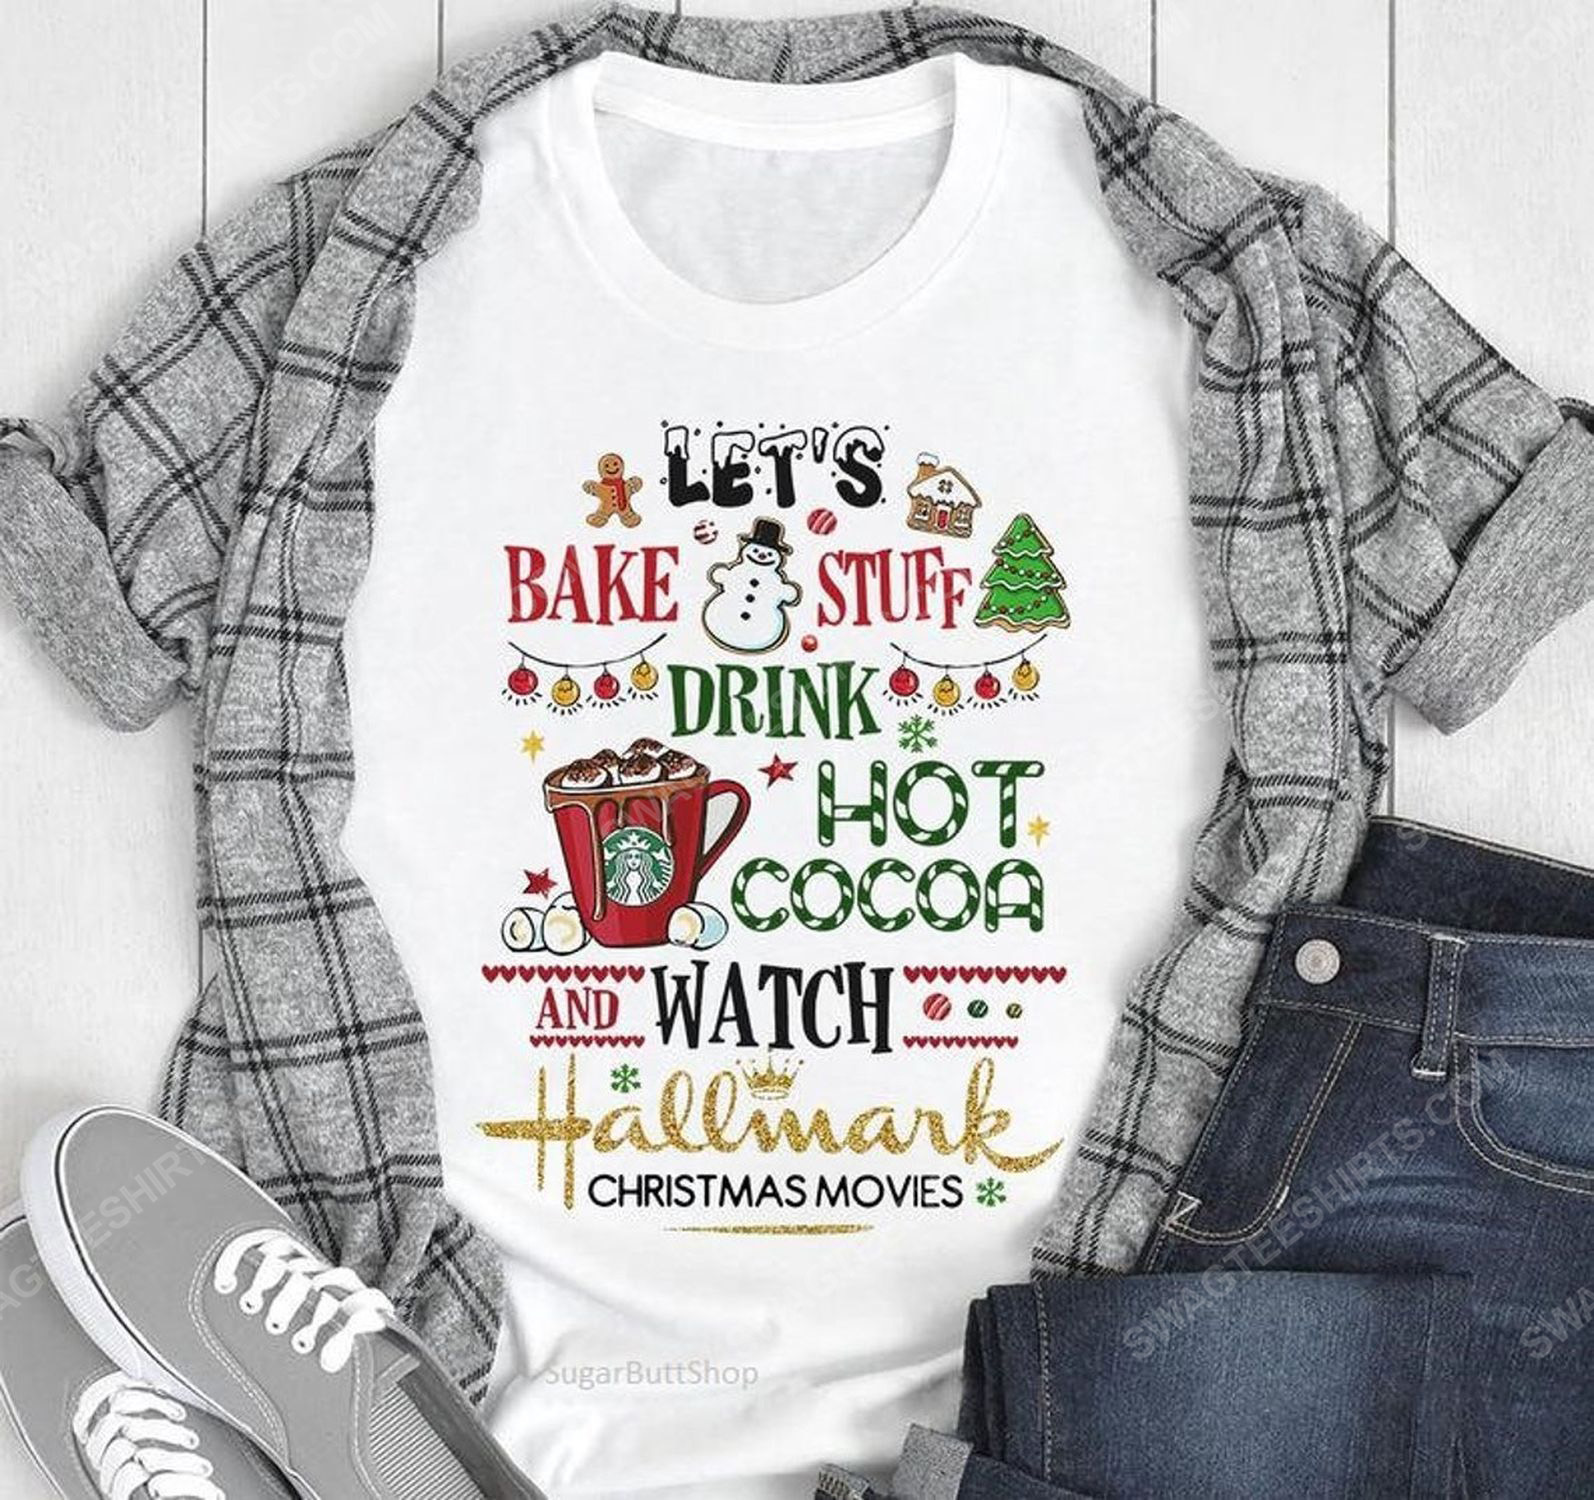 It's a hot cocoa fire place flannelpjs hallmark channel kind of day shirt 4